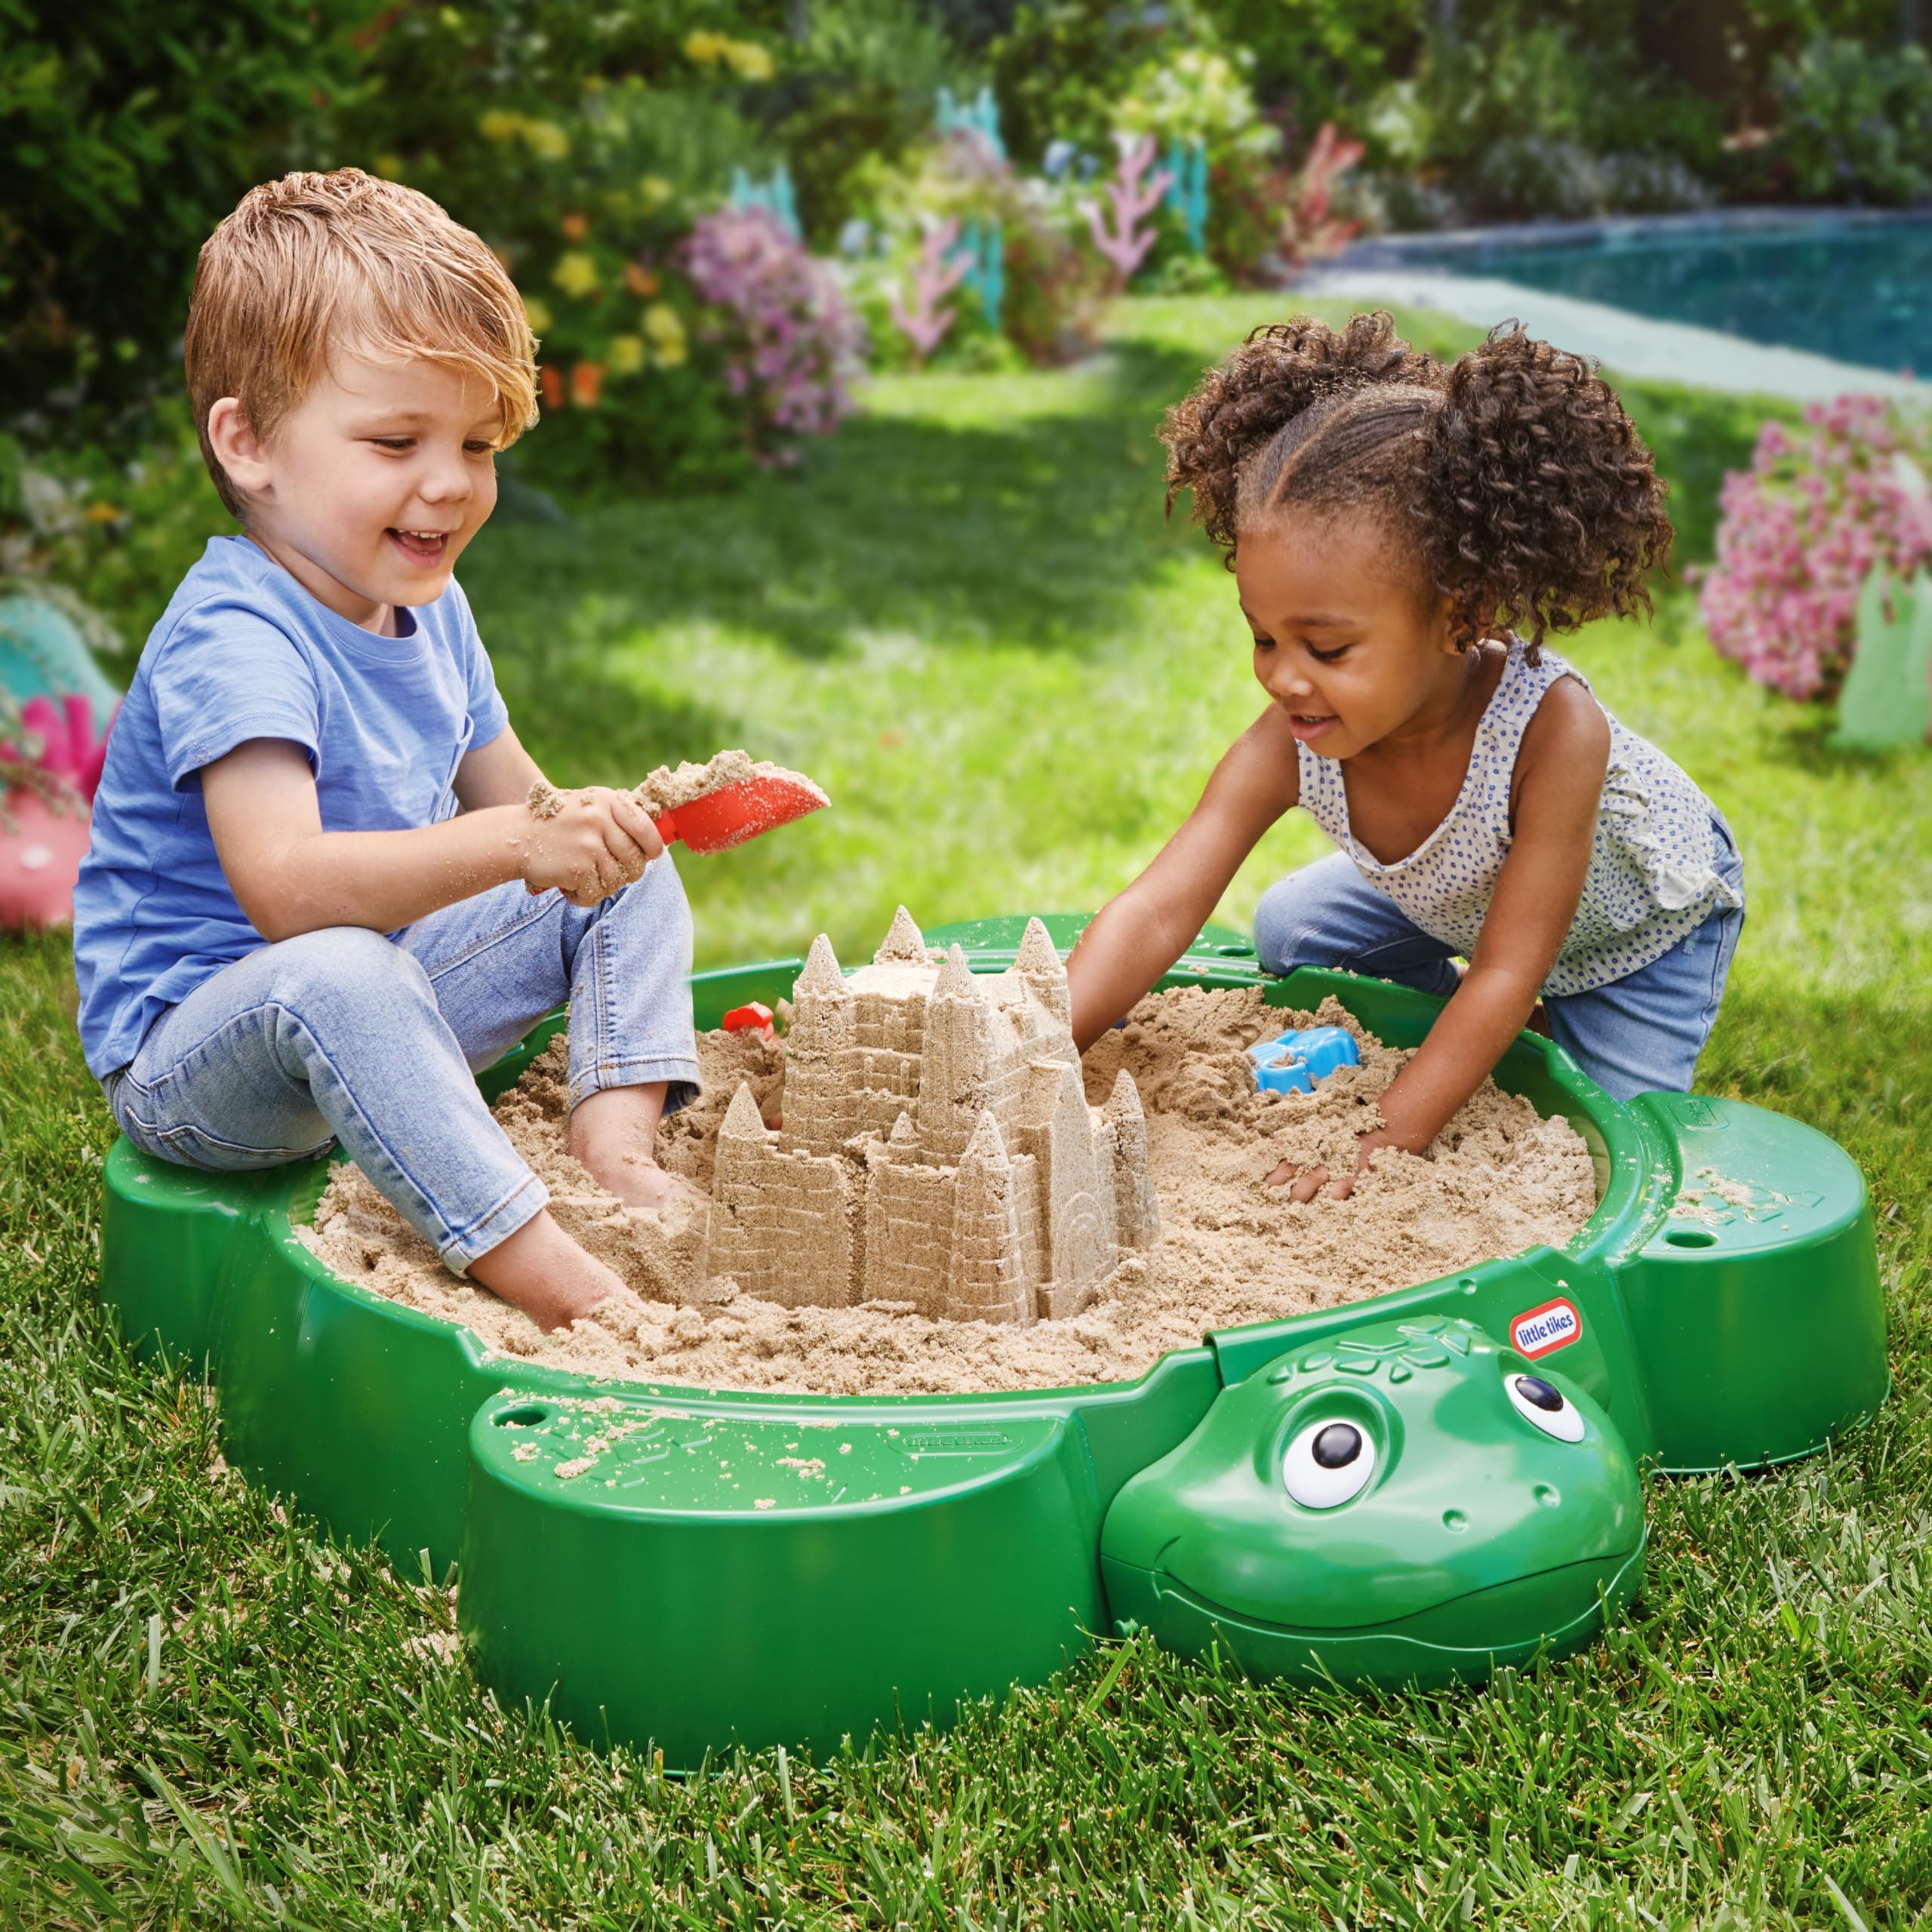 Little Tikes Turtle Sandbox, for Boys and Girls Ages 1-6 Years